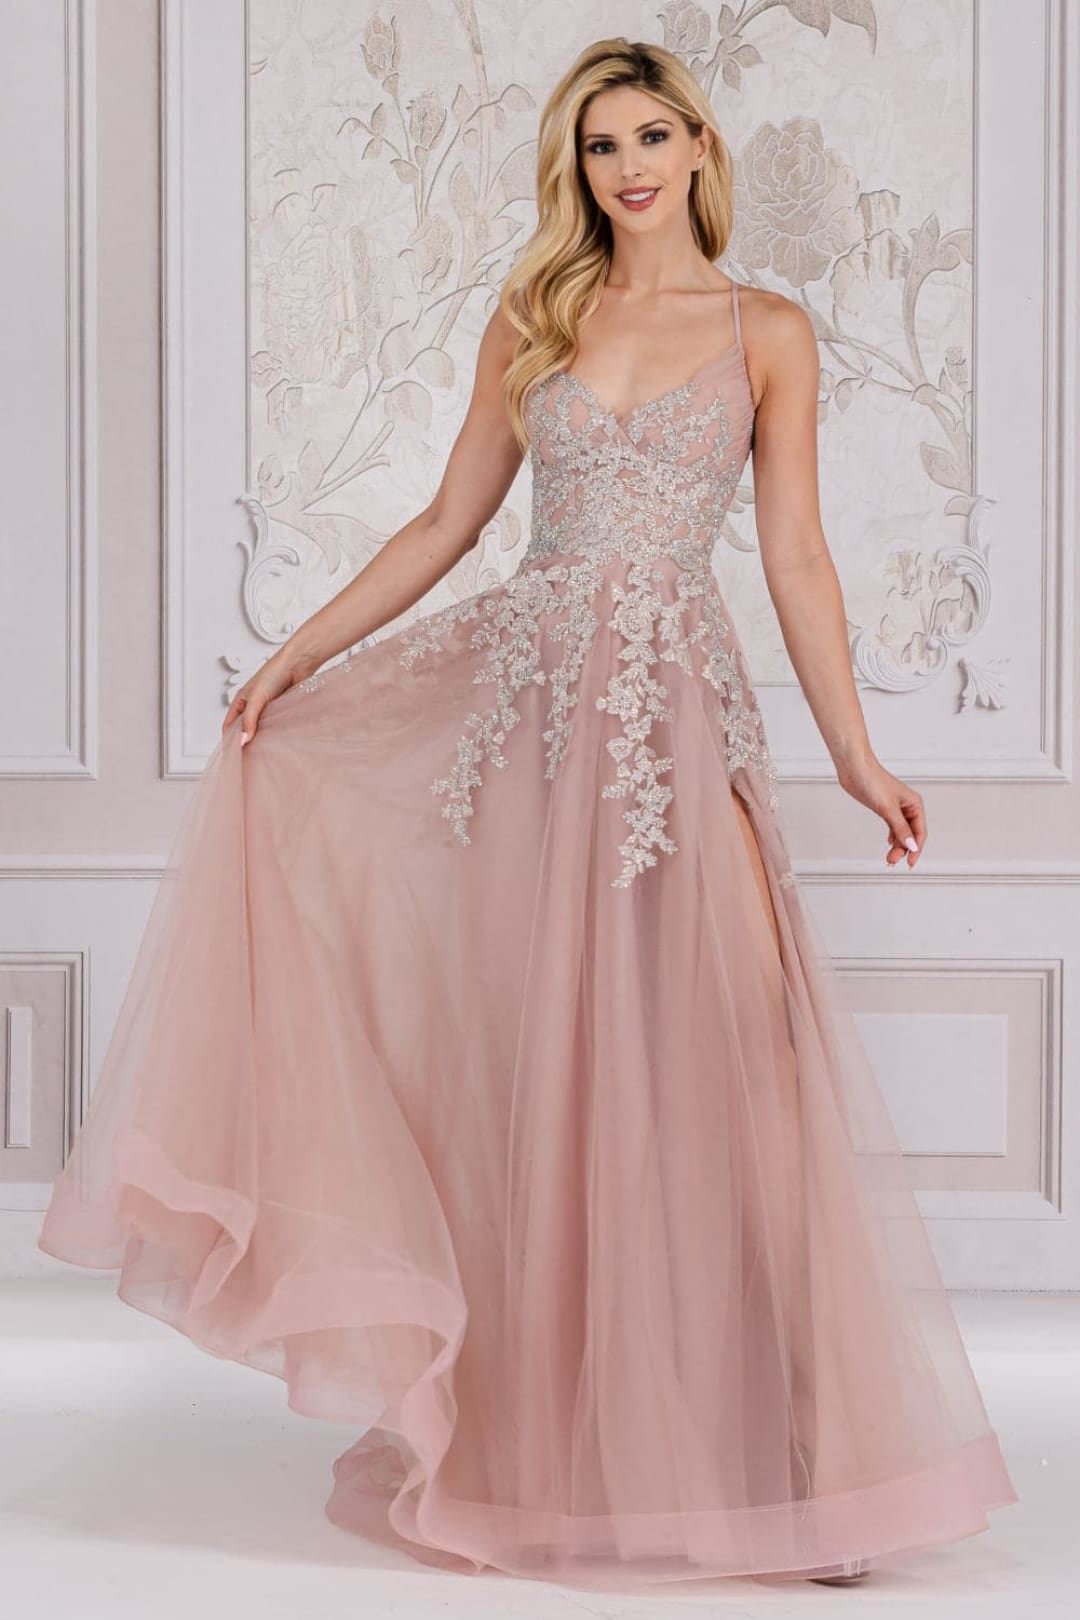 Strapless Pink Mermaid Formal Evening Dress RS2015 | Pink evening dress,  Pink prom dresses, Prom dresses long pink